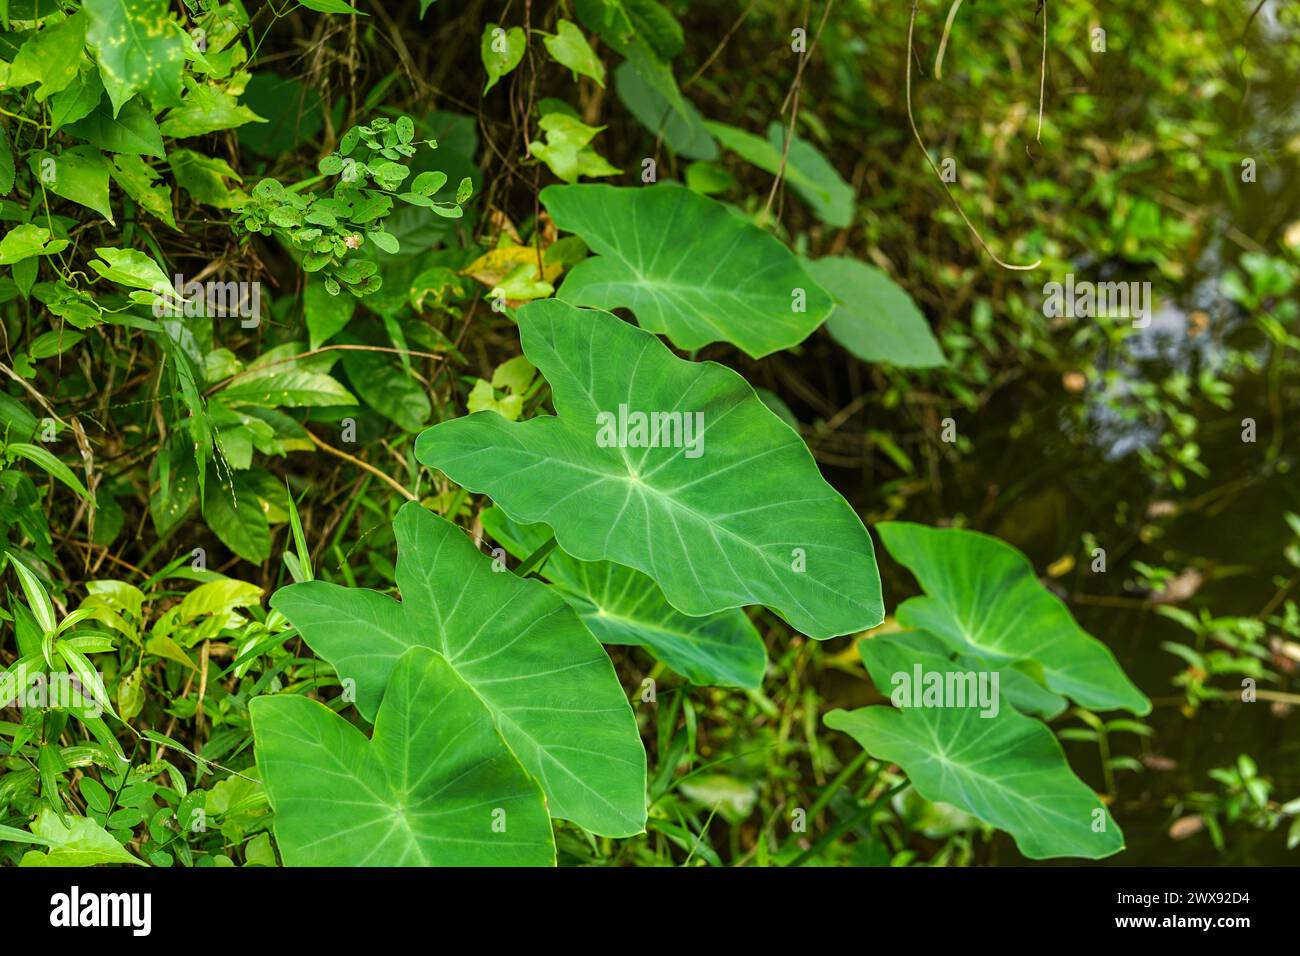 Taro leaves plants growing up in a forest Stock Photo